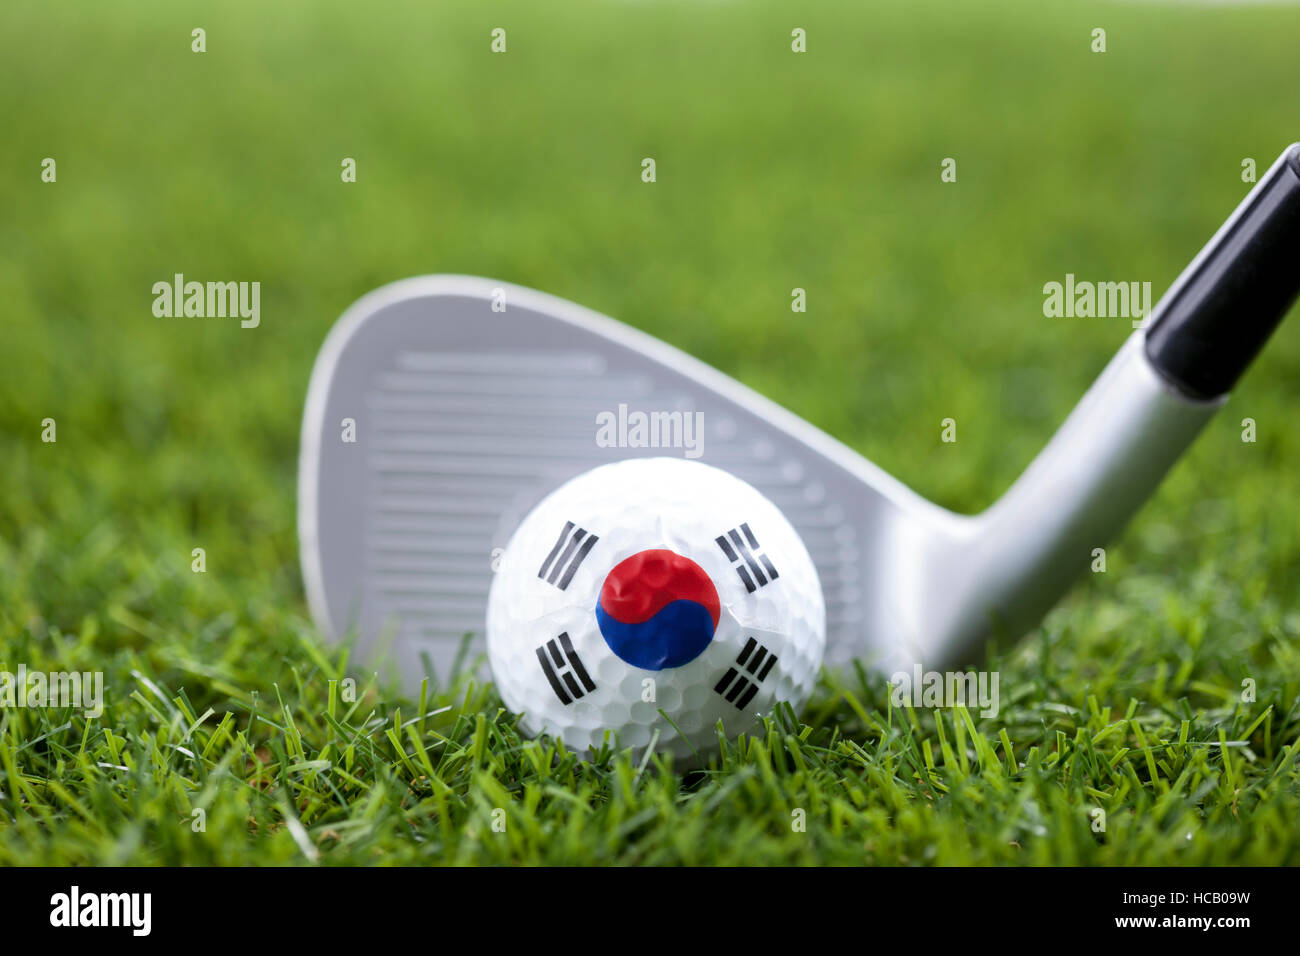 Golf ball with Korean flag and golf club on grass Stock Photo